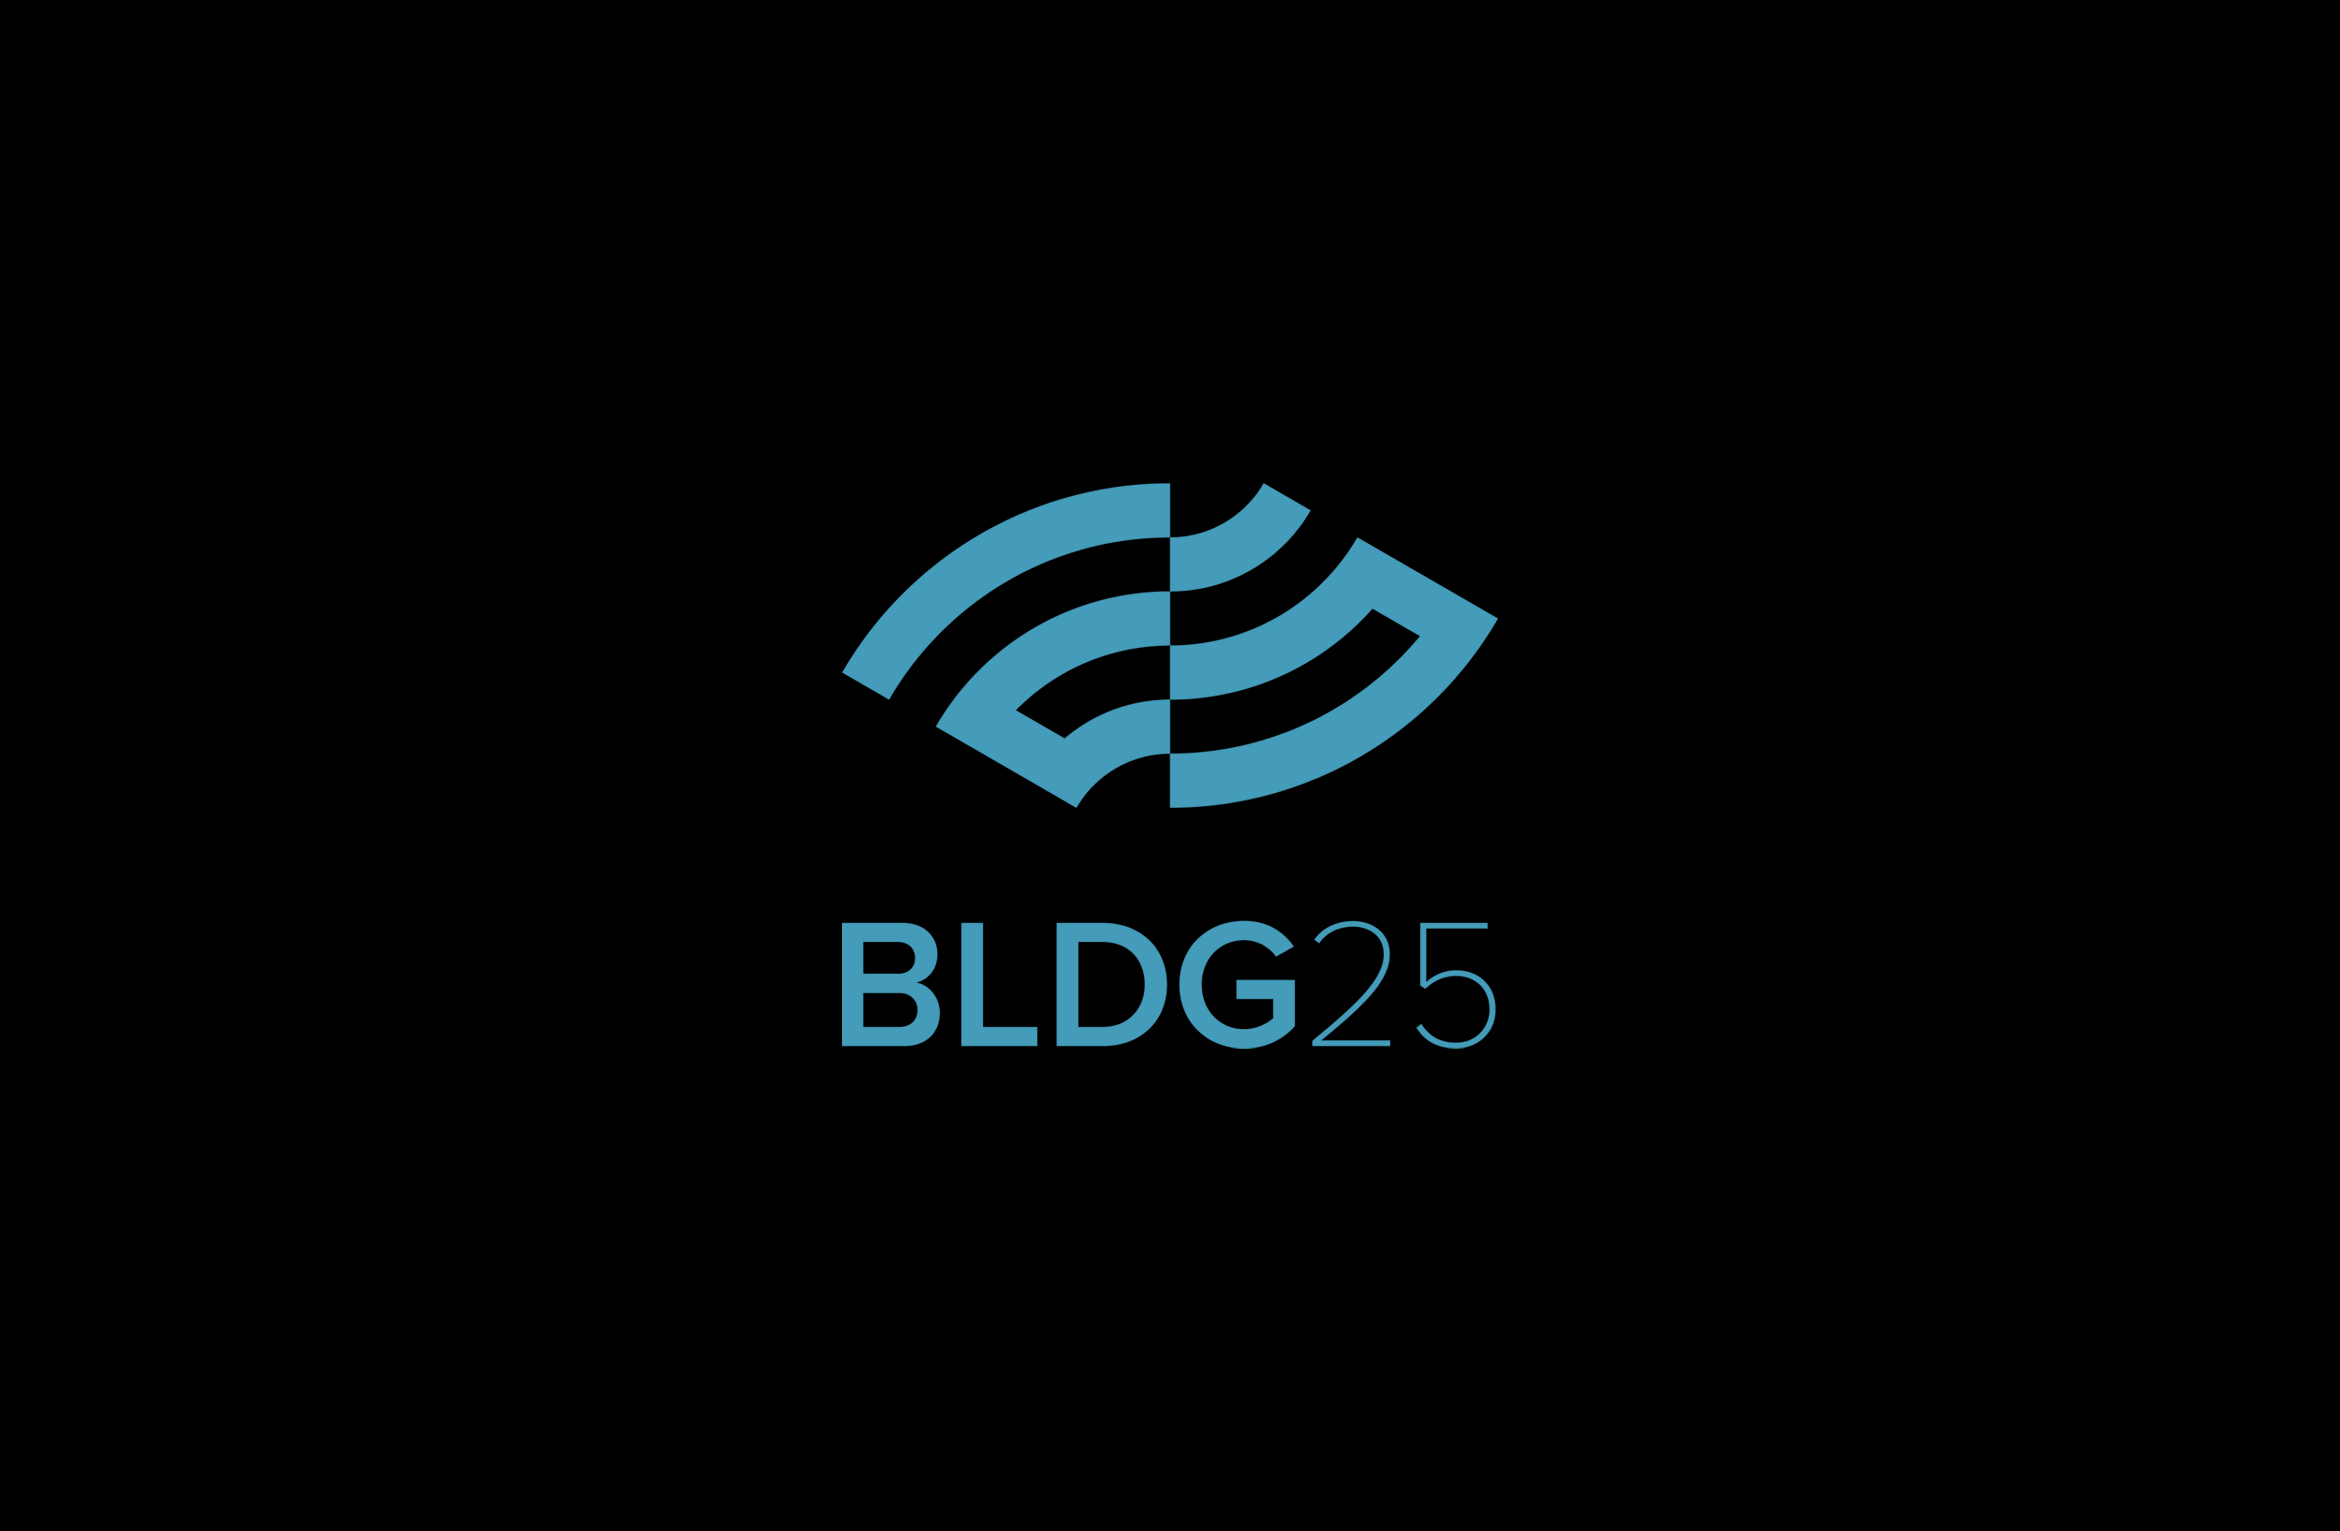 digital logo design with curved 2 and 5 over the words BLDG25. Aqua on black background